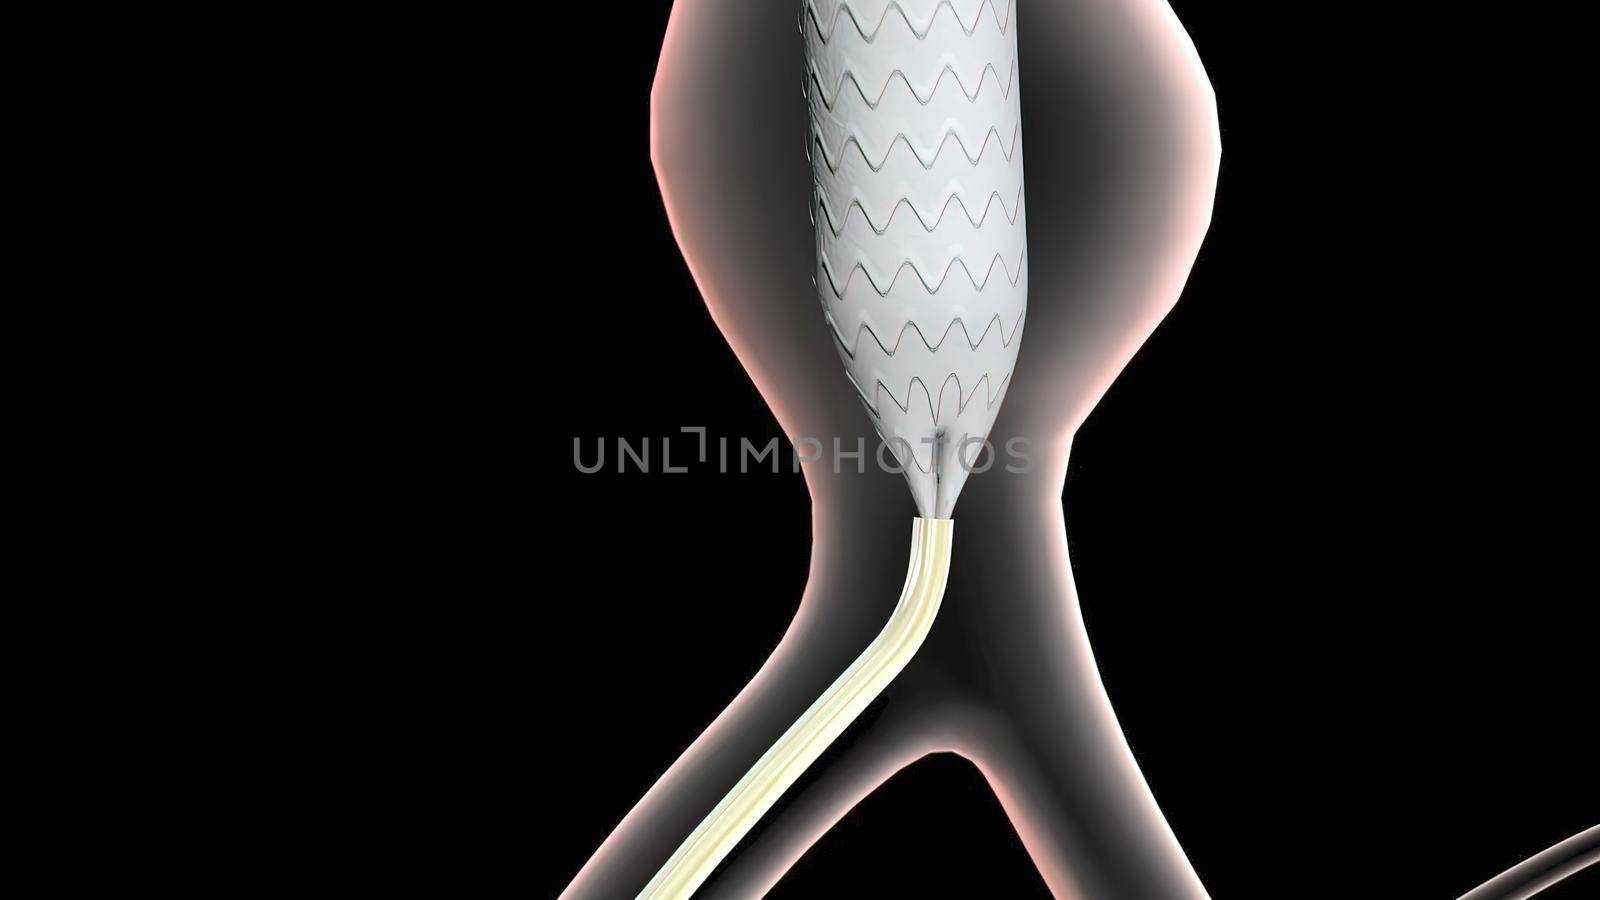 abdominal aortic aneurysm treatment by creativepic